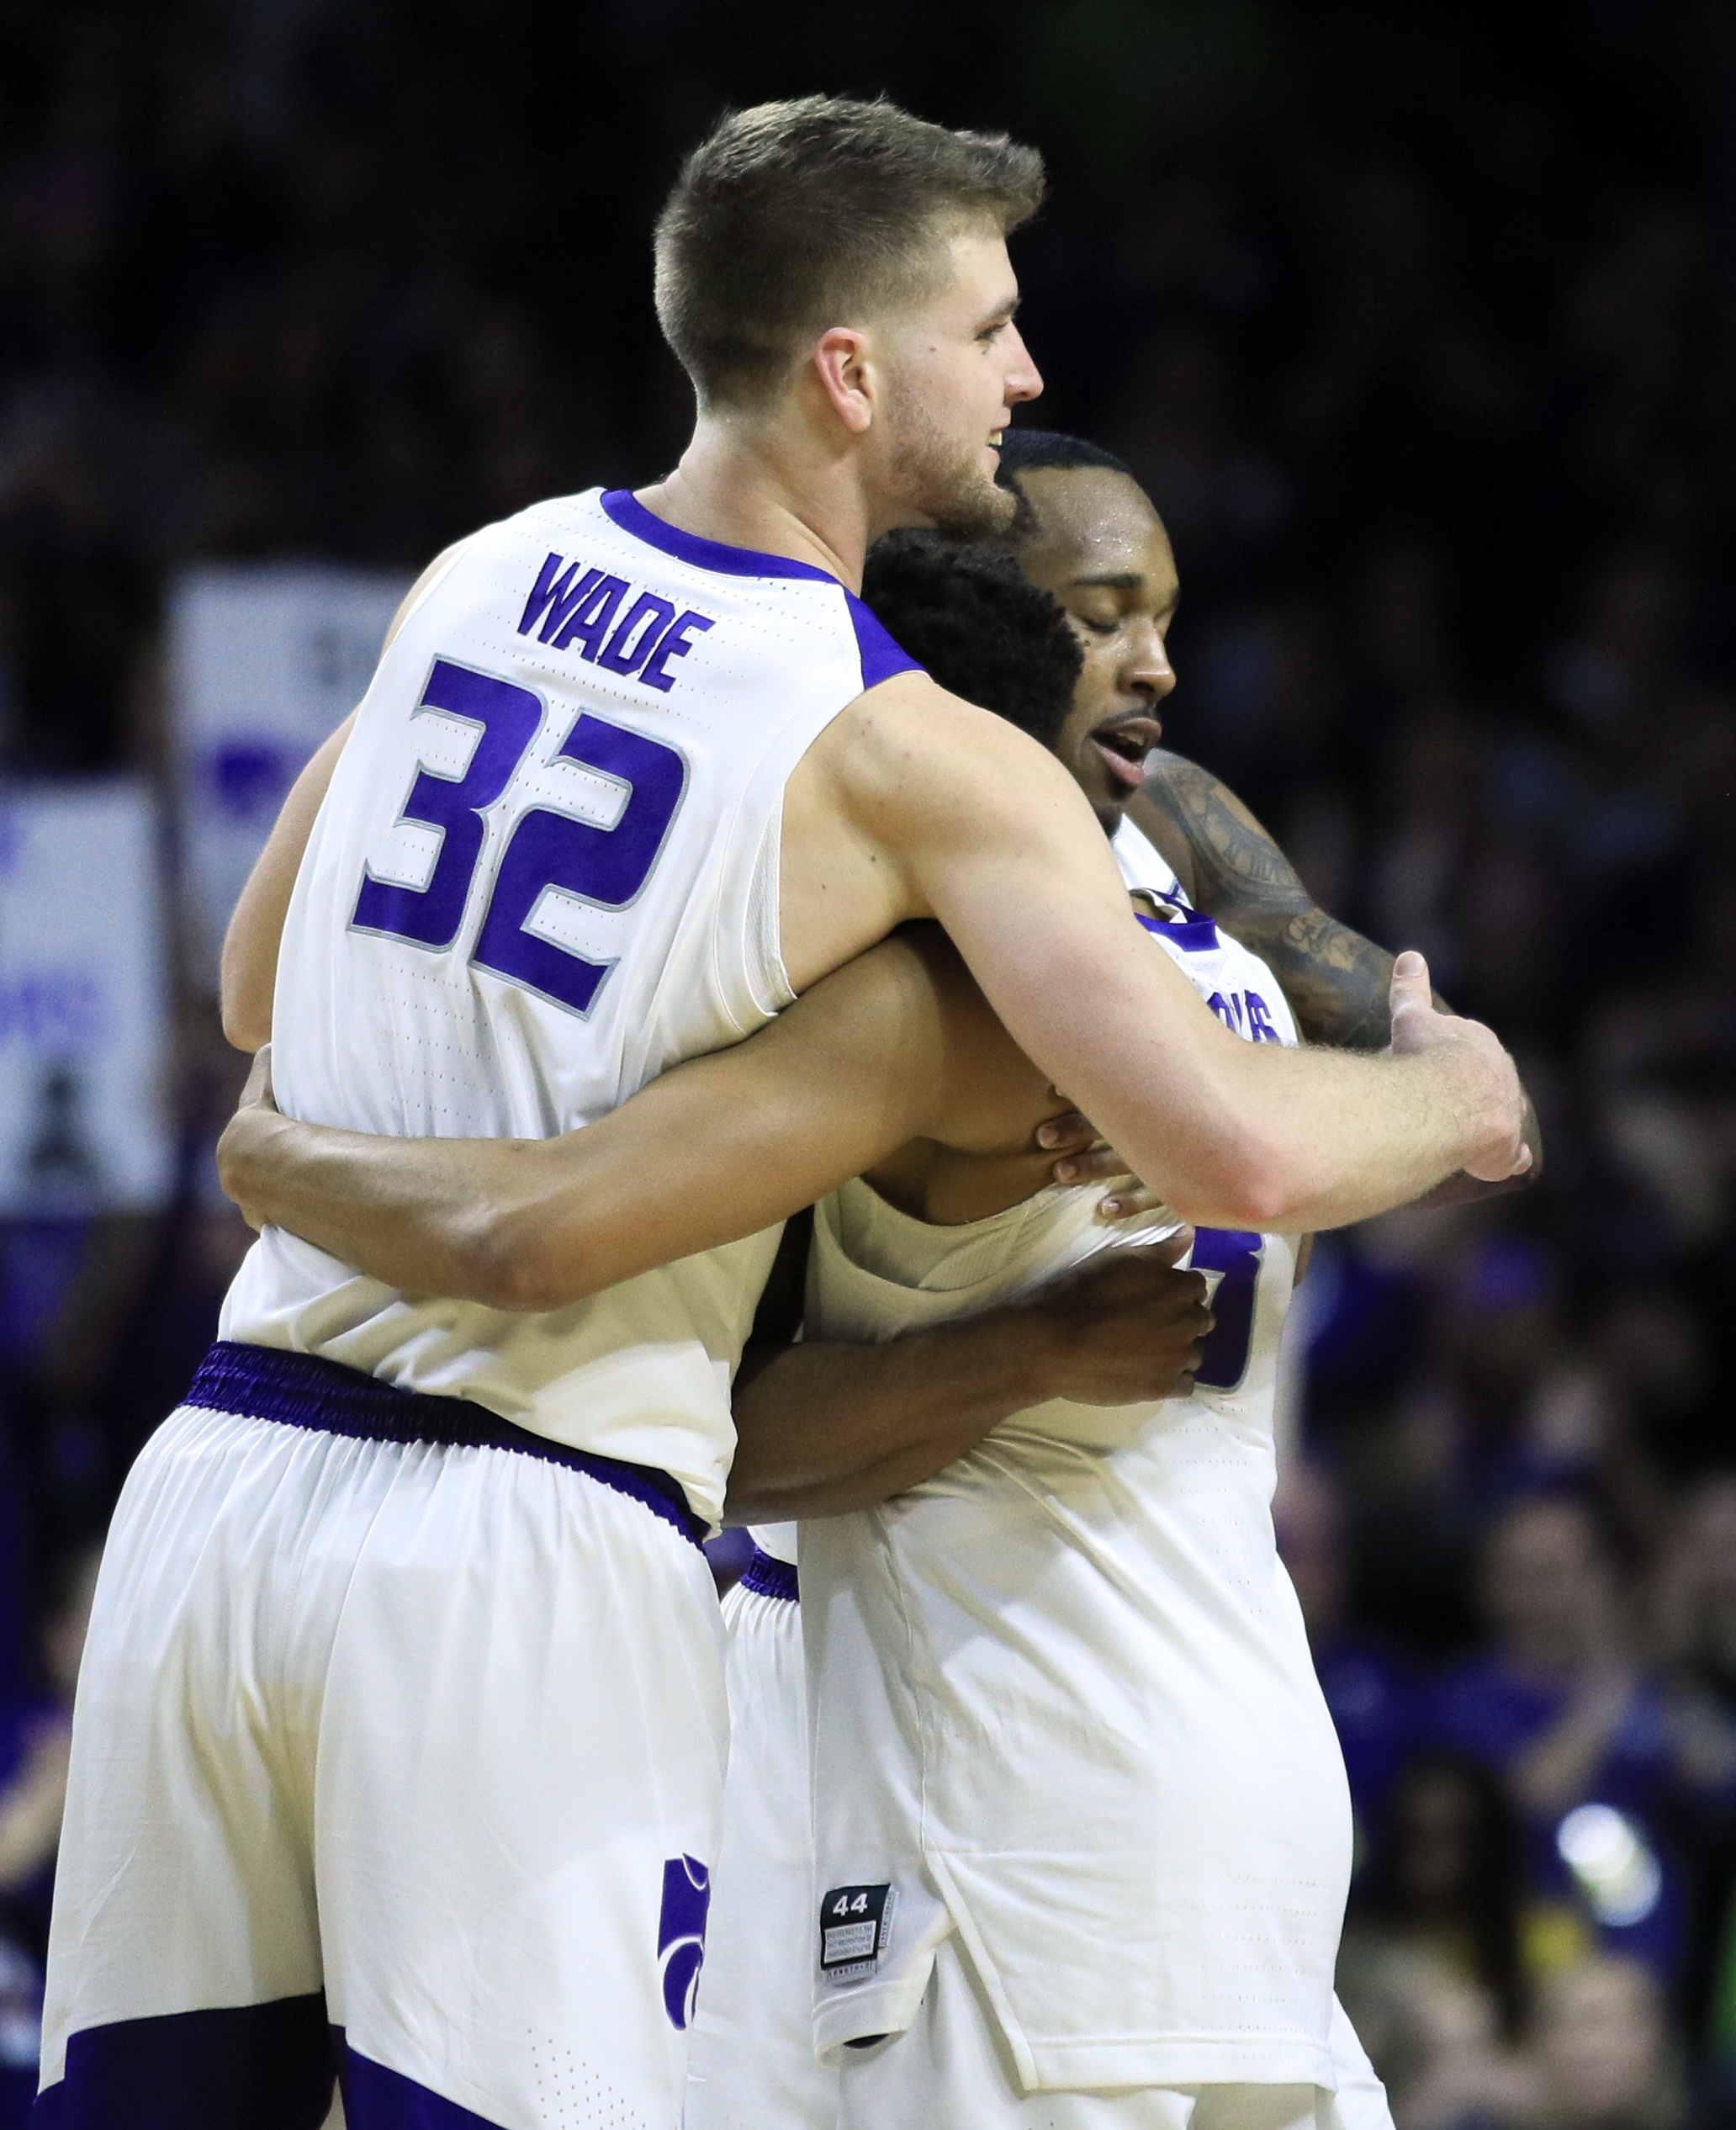 K-State's Dean Wade unlikely to play in Big 12 tourney